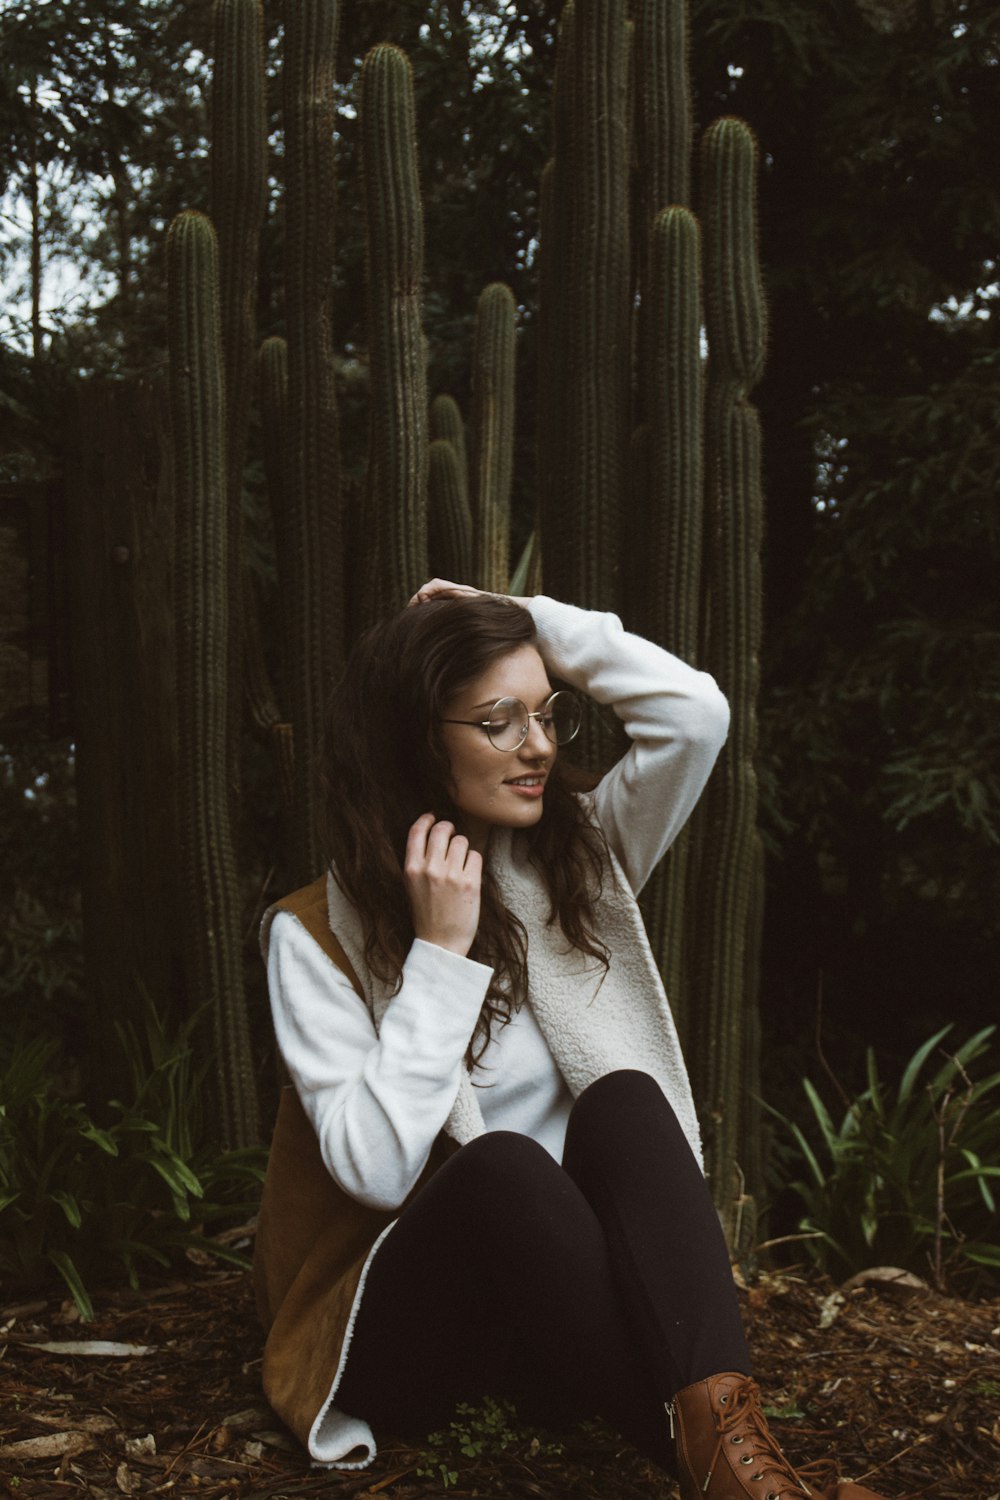 smiling woman wearing brown and white coat sitting beside green cacti plants